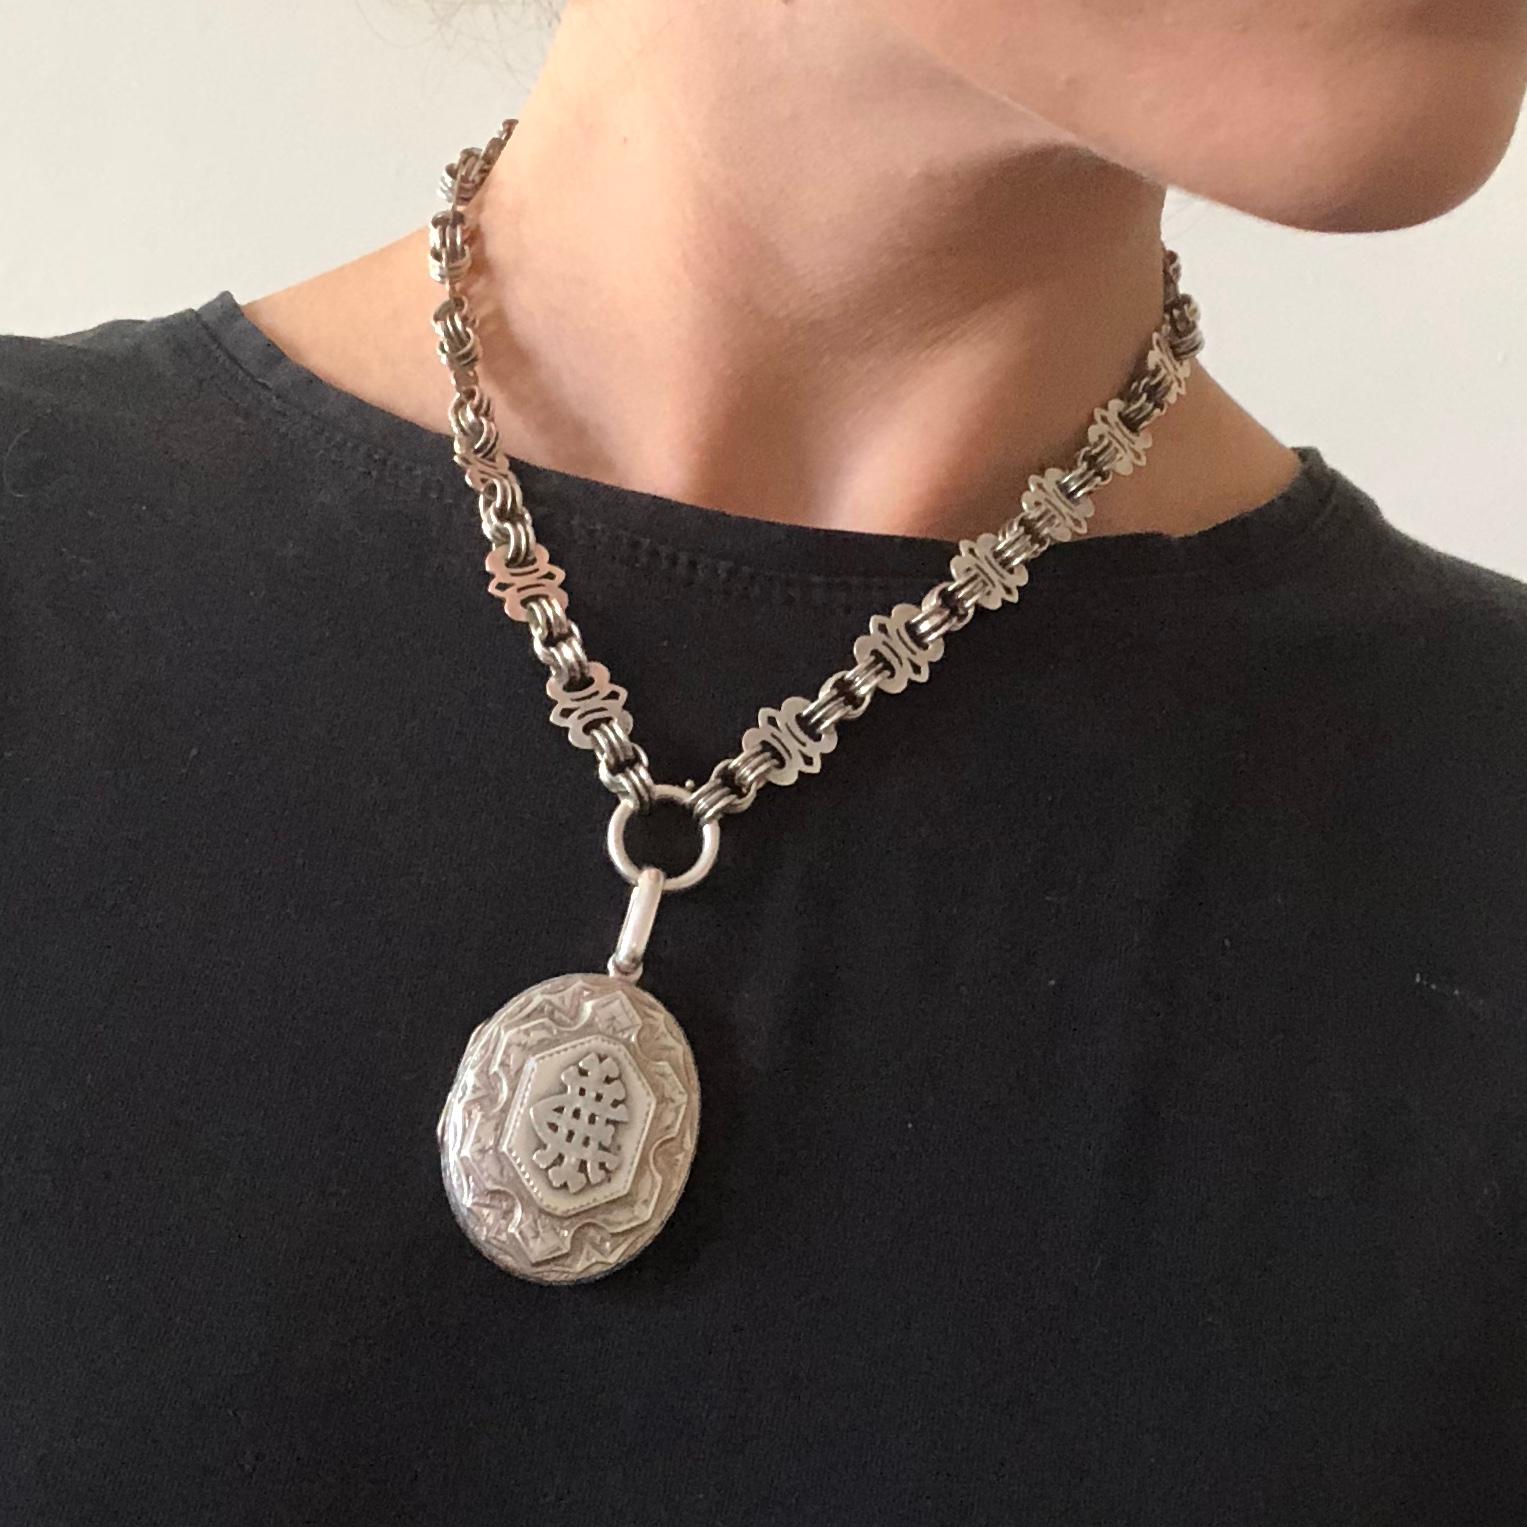 Women's Victorian Silver Ornate Necklace and Locket